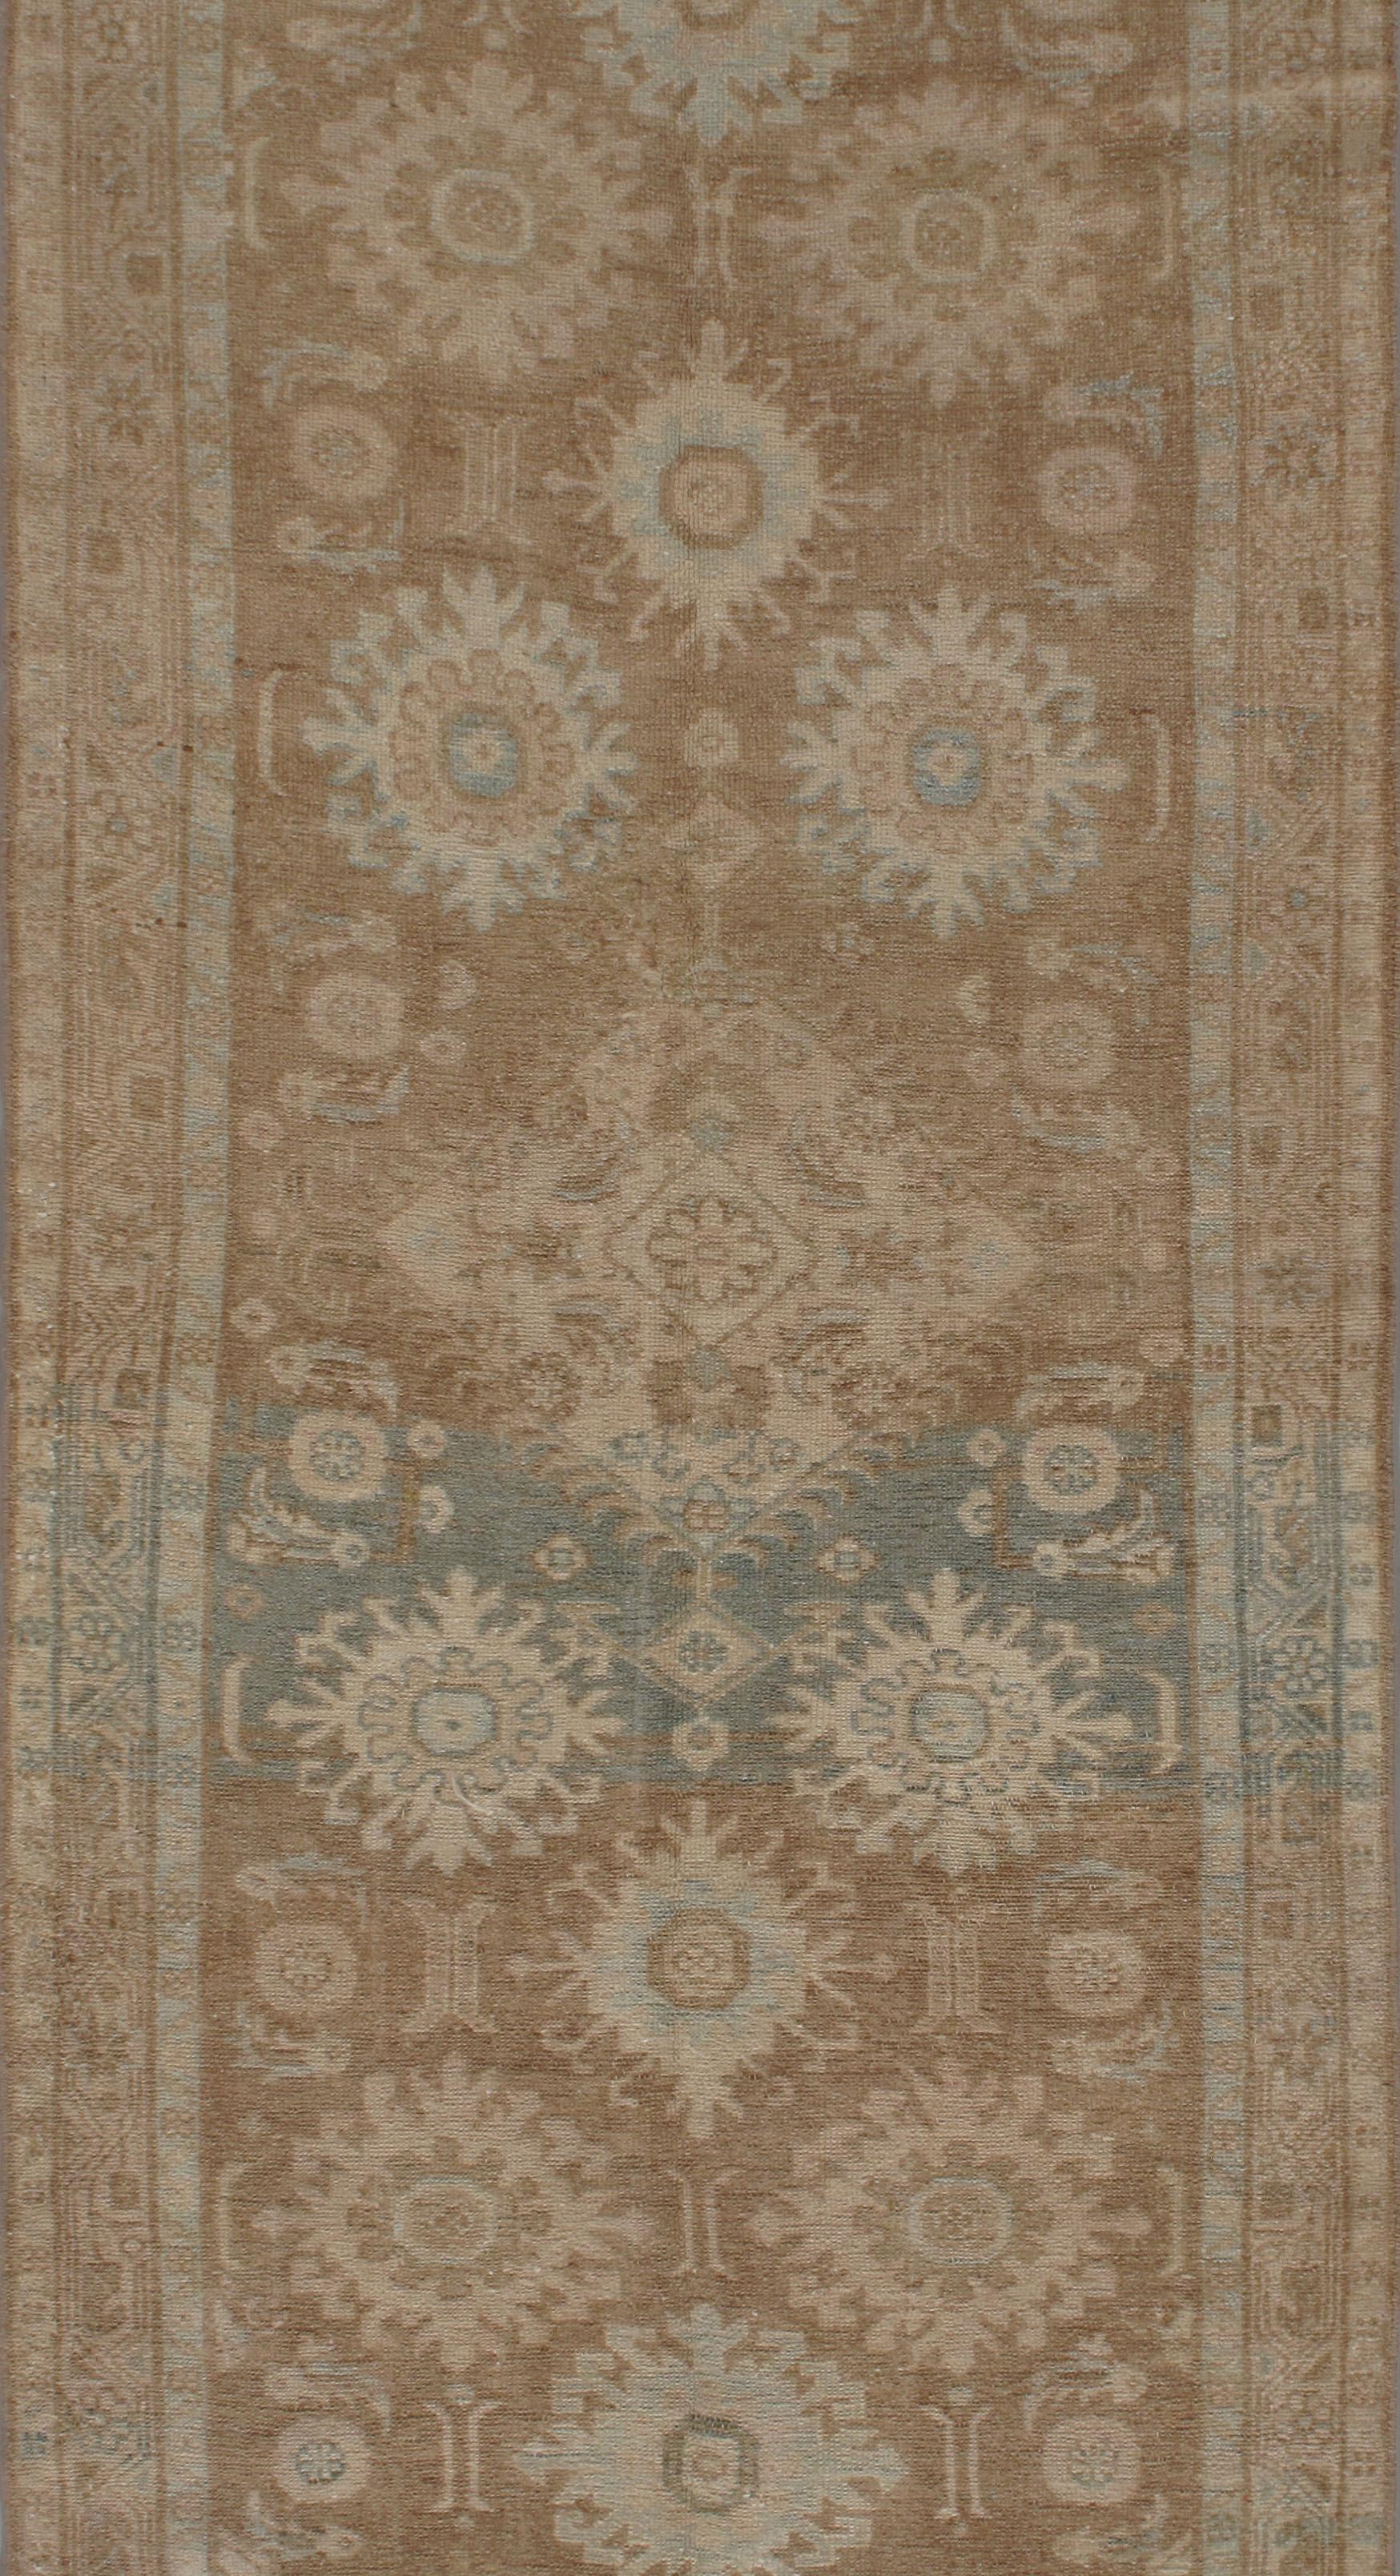 Vintage Turkish Oushak Runner, 3' x 9'7. Oushak's are known for their soft palettes combined with eccentric drawing. Oushak in western Turkey has the longest continuous rug weaving history, stretching back at least to the mid-fifteenth century. It